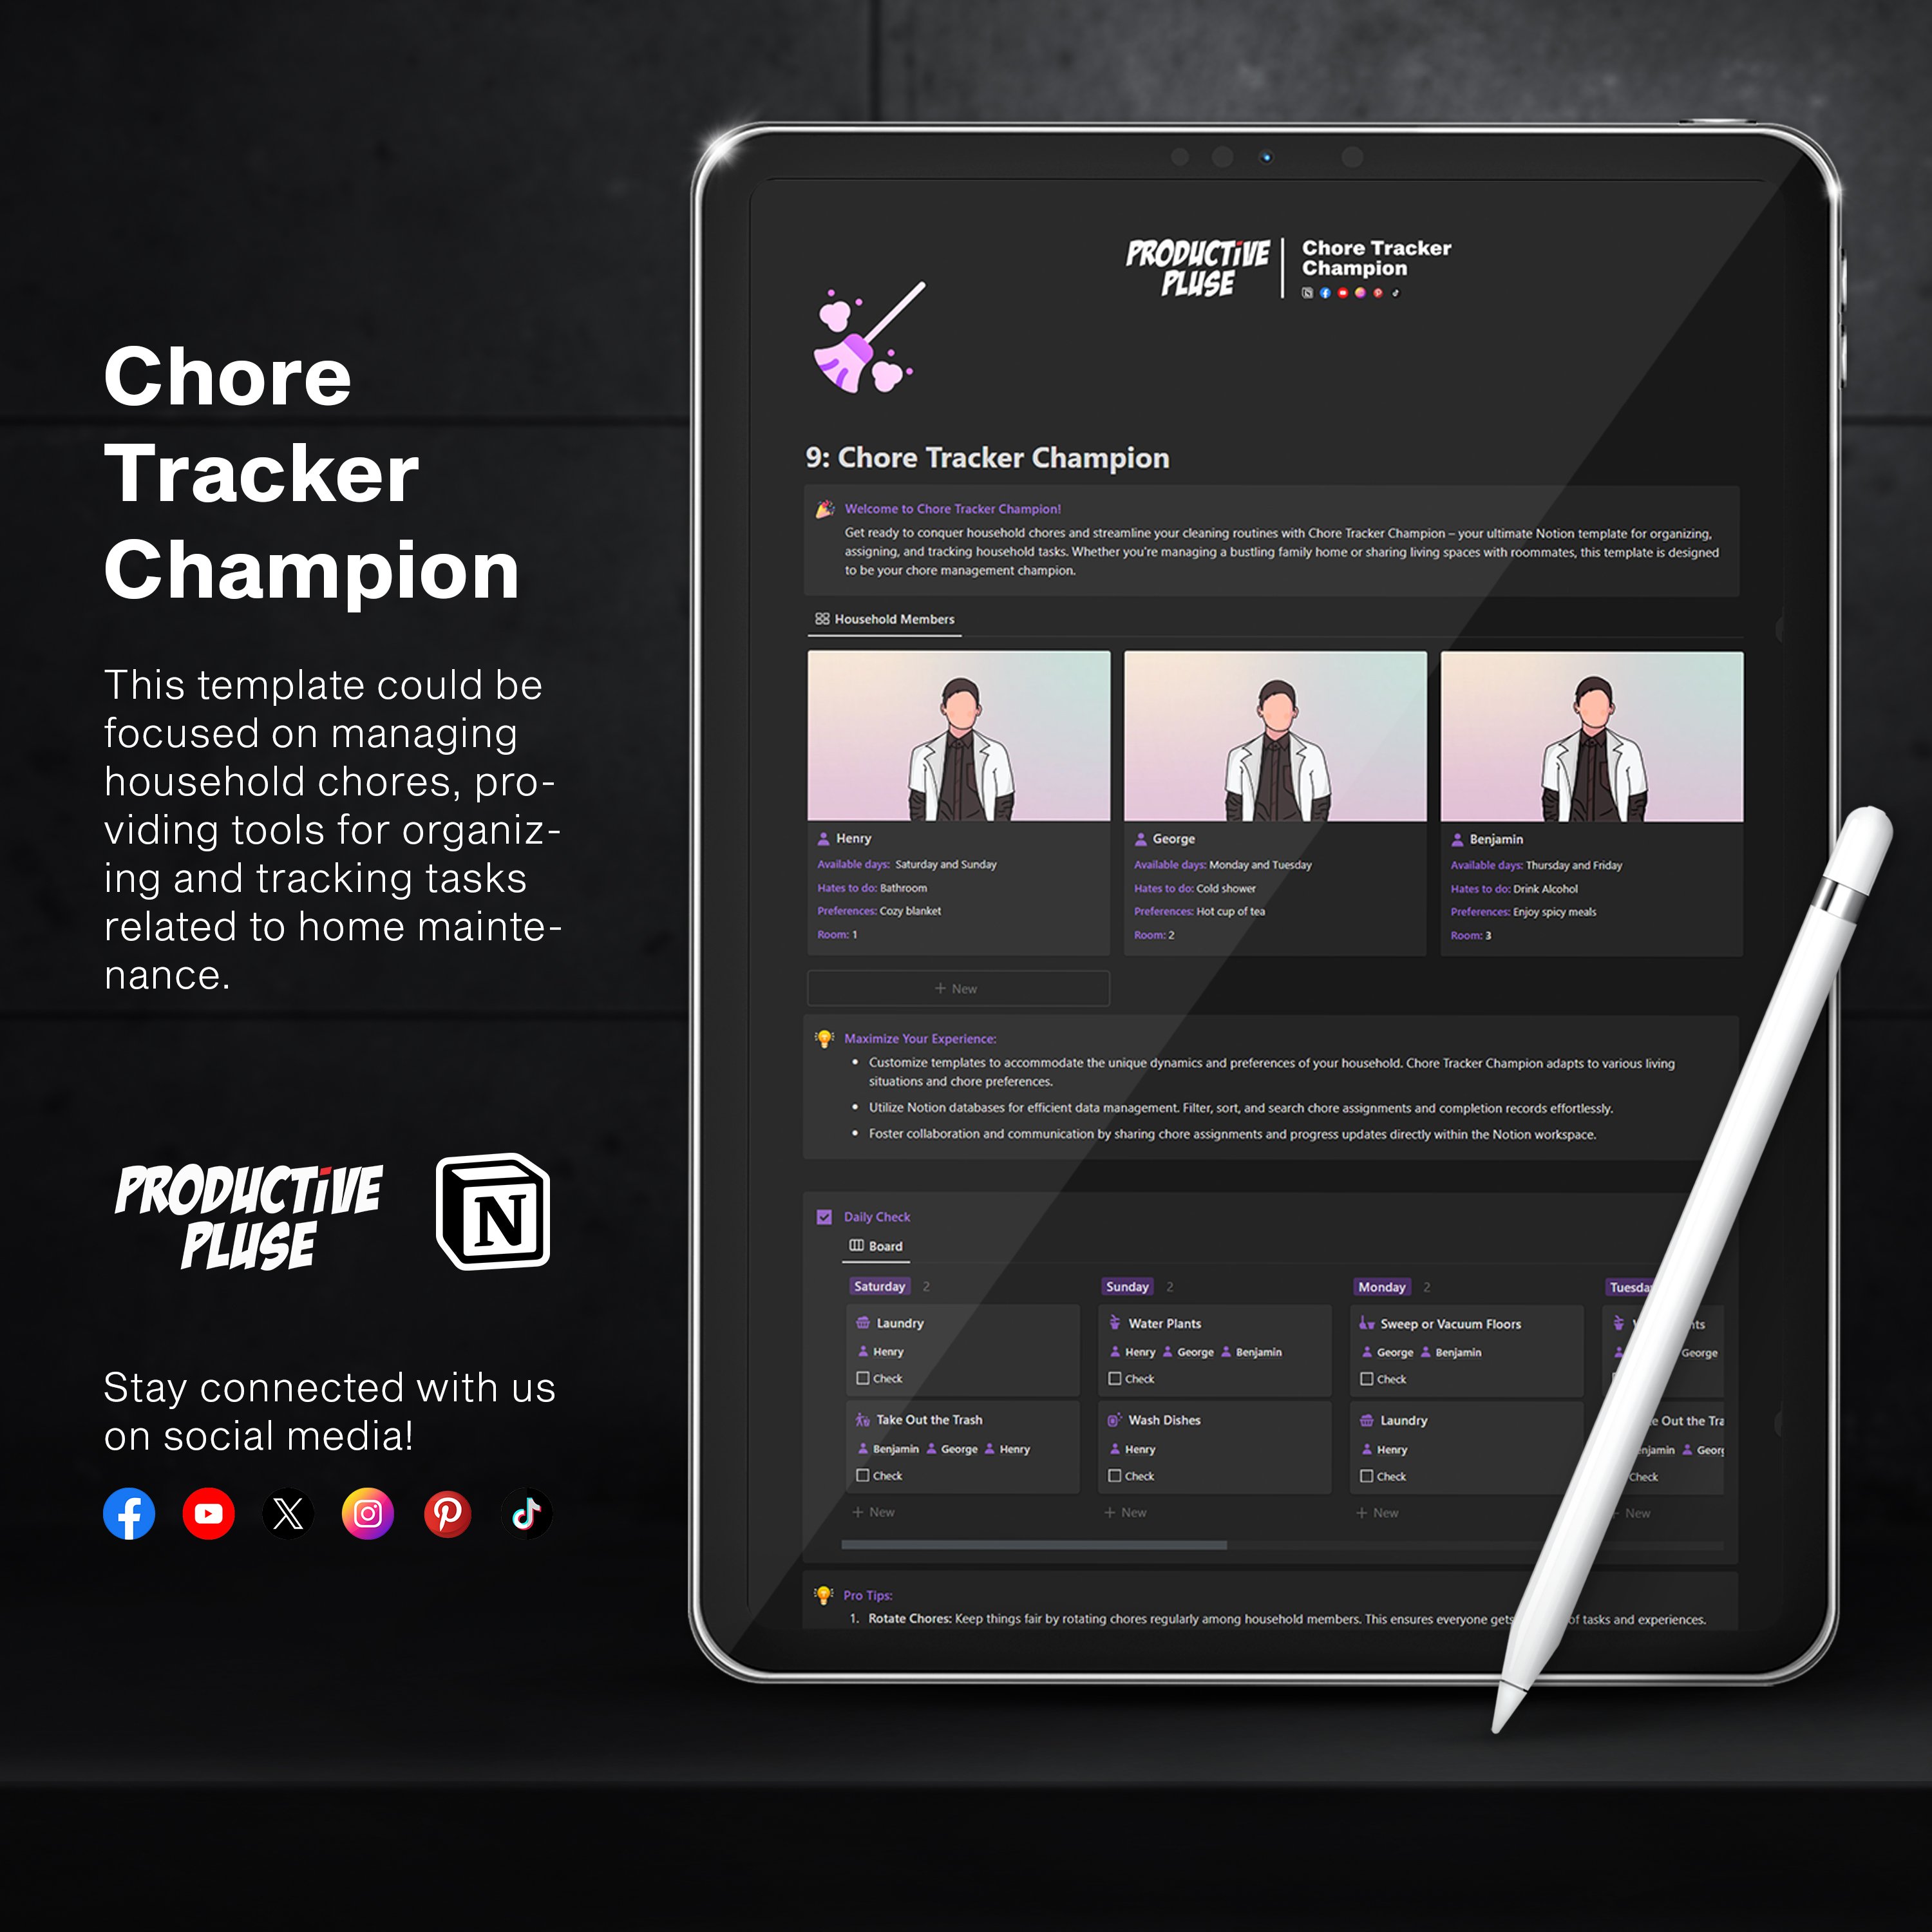 Chore Tracker Champion is a template that is focused on managing household chores and providing tools for organizing and tracking tasks related to home maintenance.